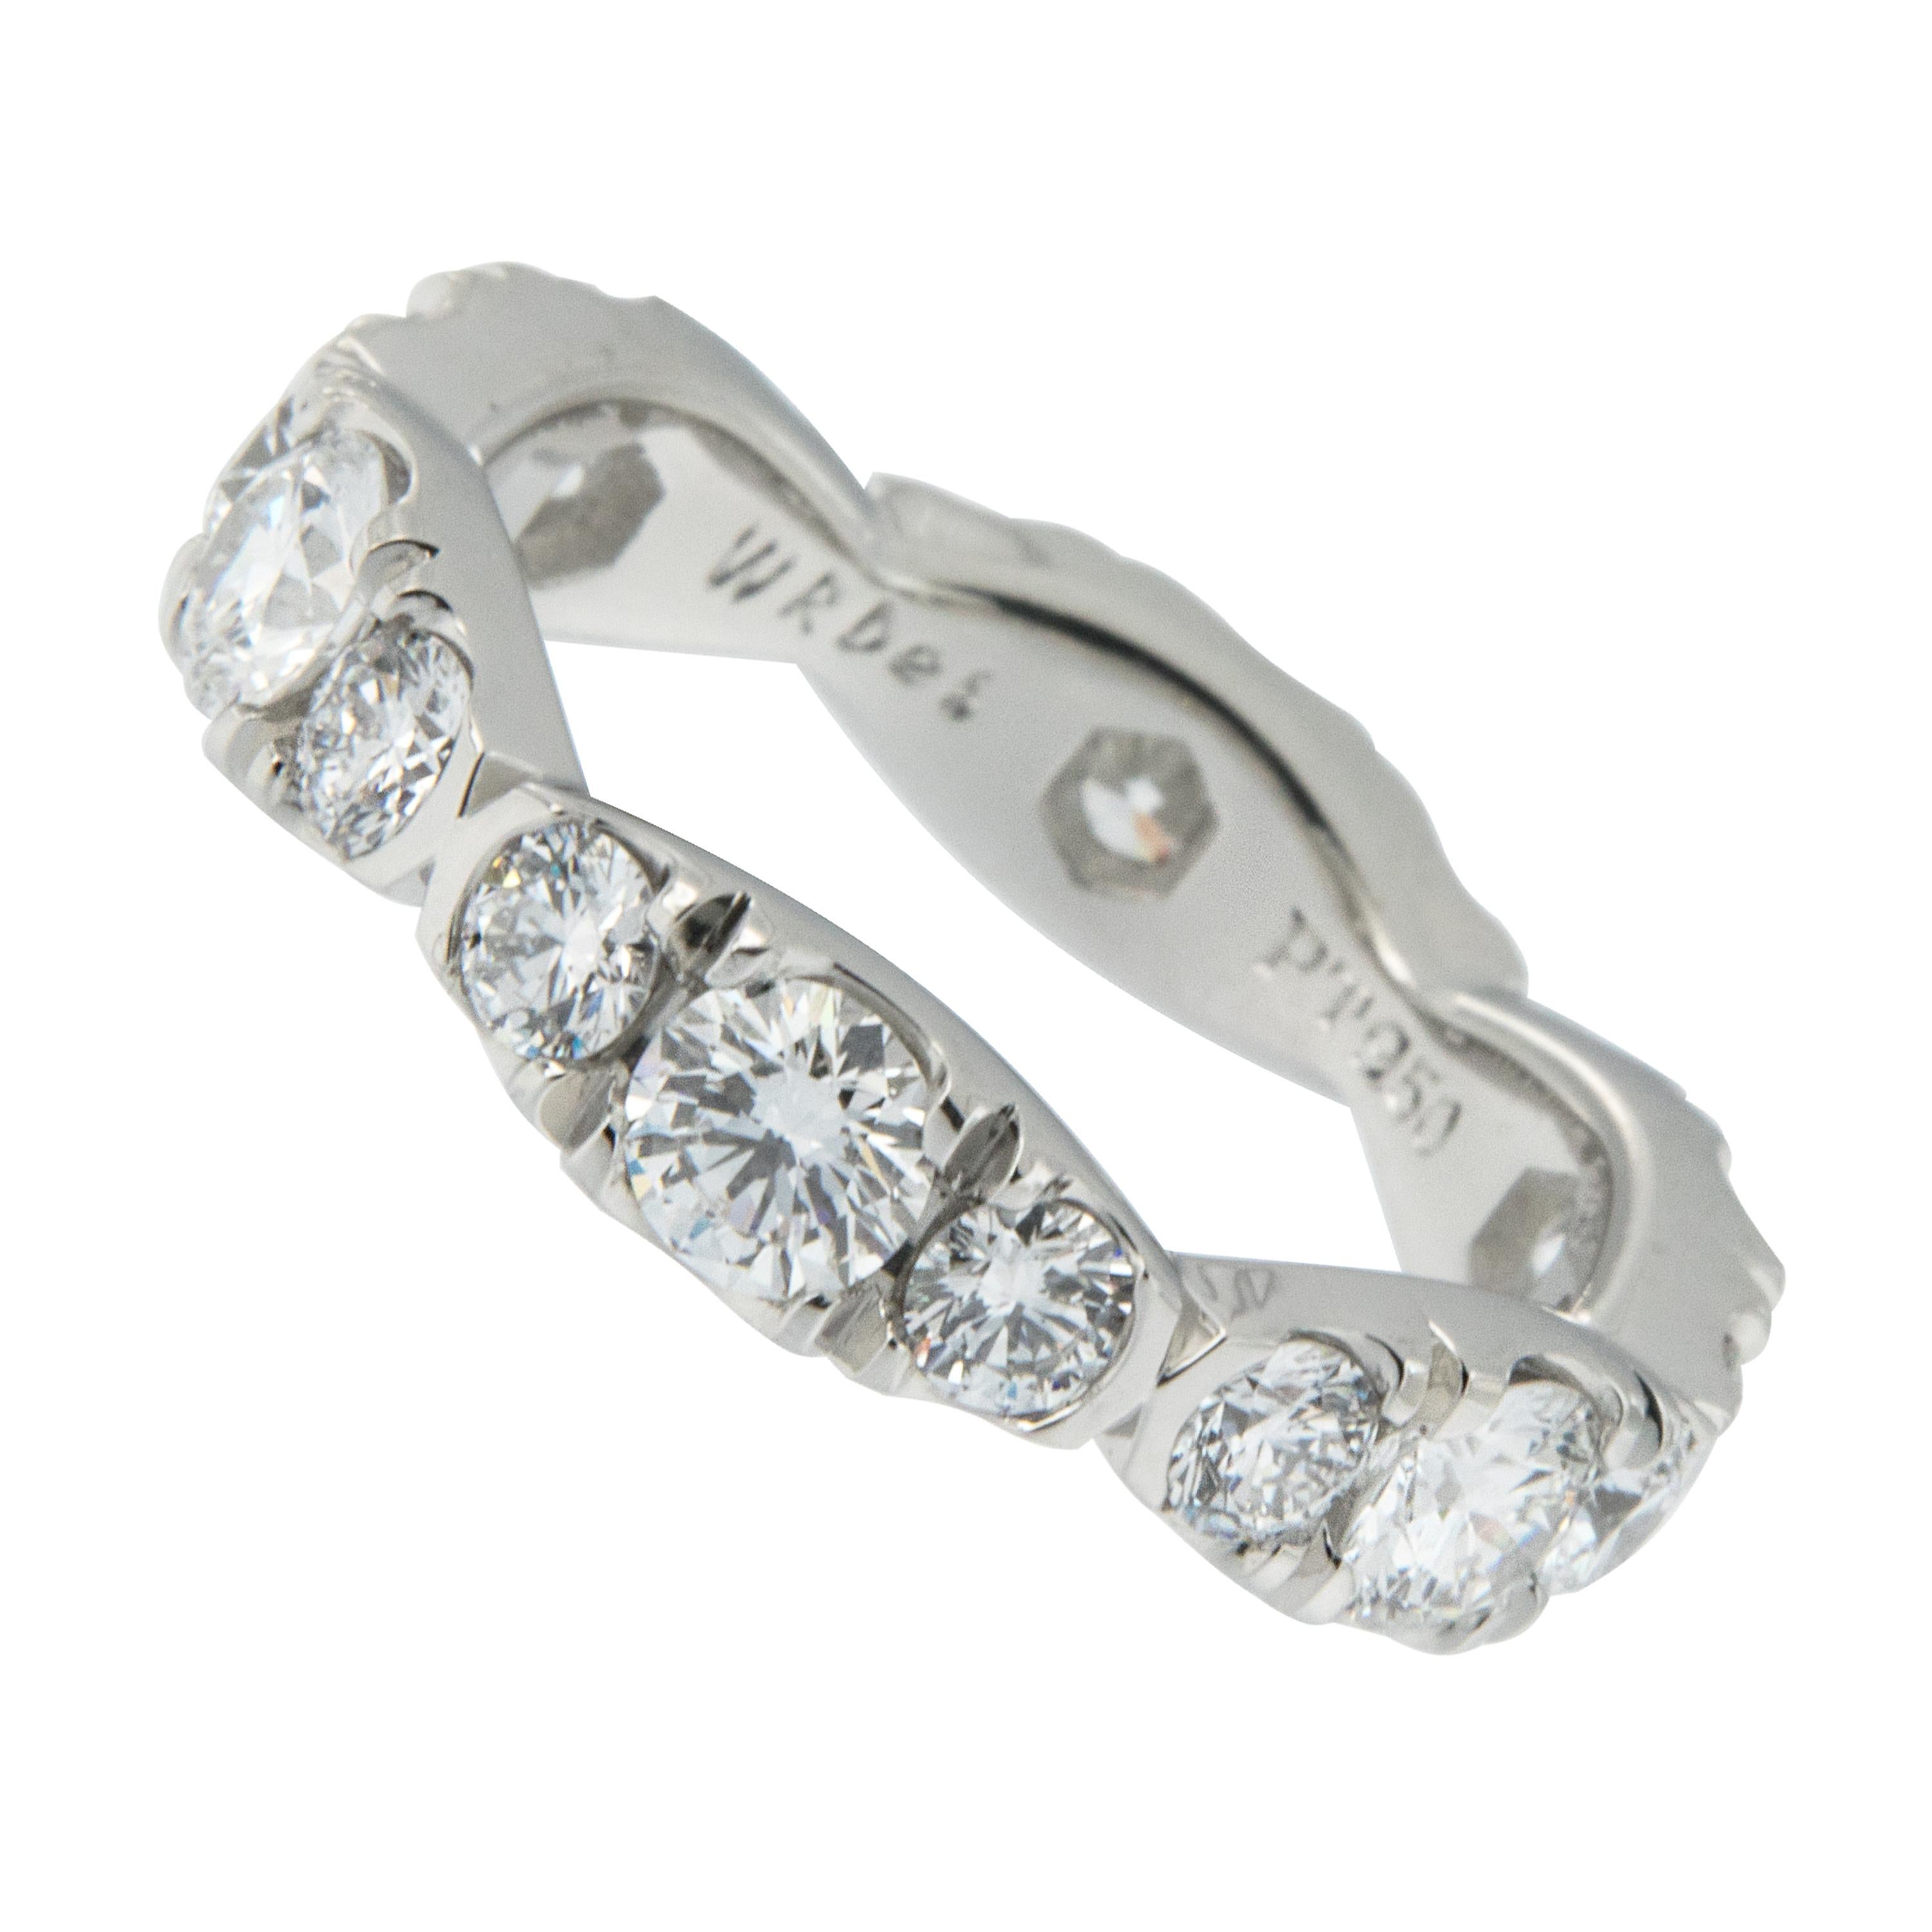 Expertly hand fabricated eternity band by William Rosenberg made from noble metal platinum with  1.03 Cttw diamonds showing hearts & arrows of VVS clarity & F color. This scalloped ring was made in a size 6 but can be custom made in any size.